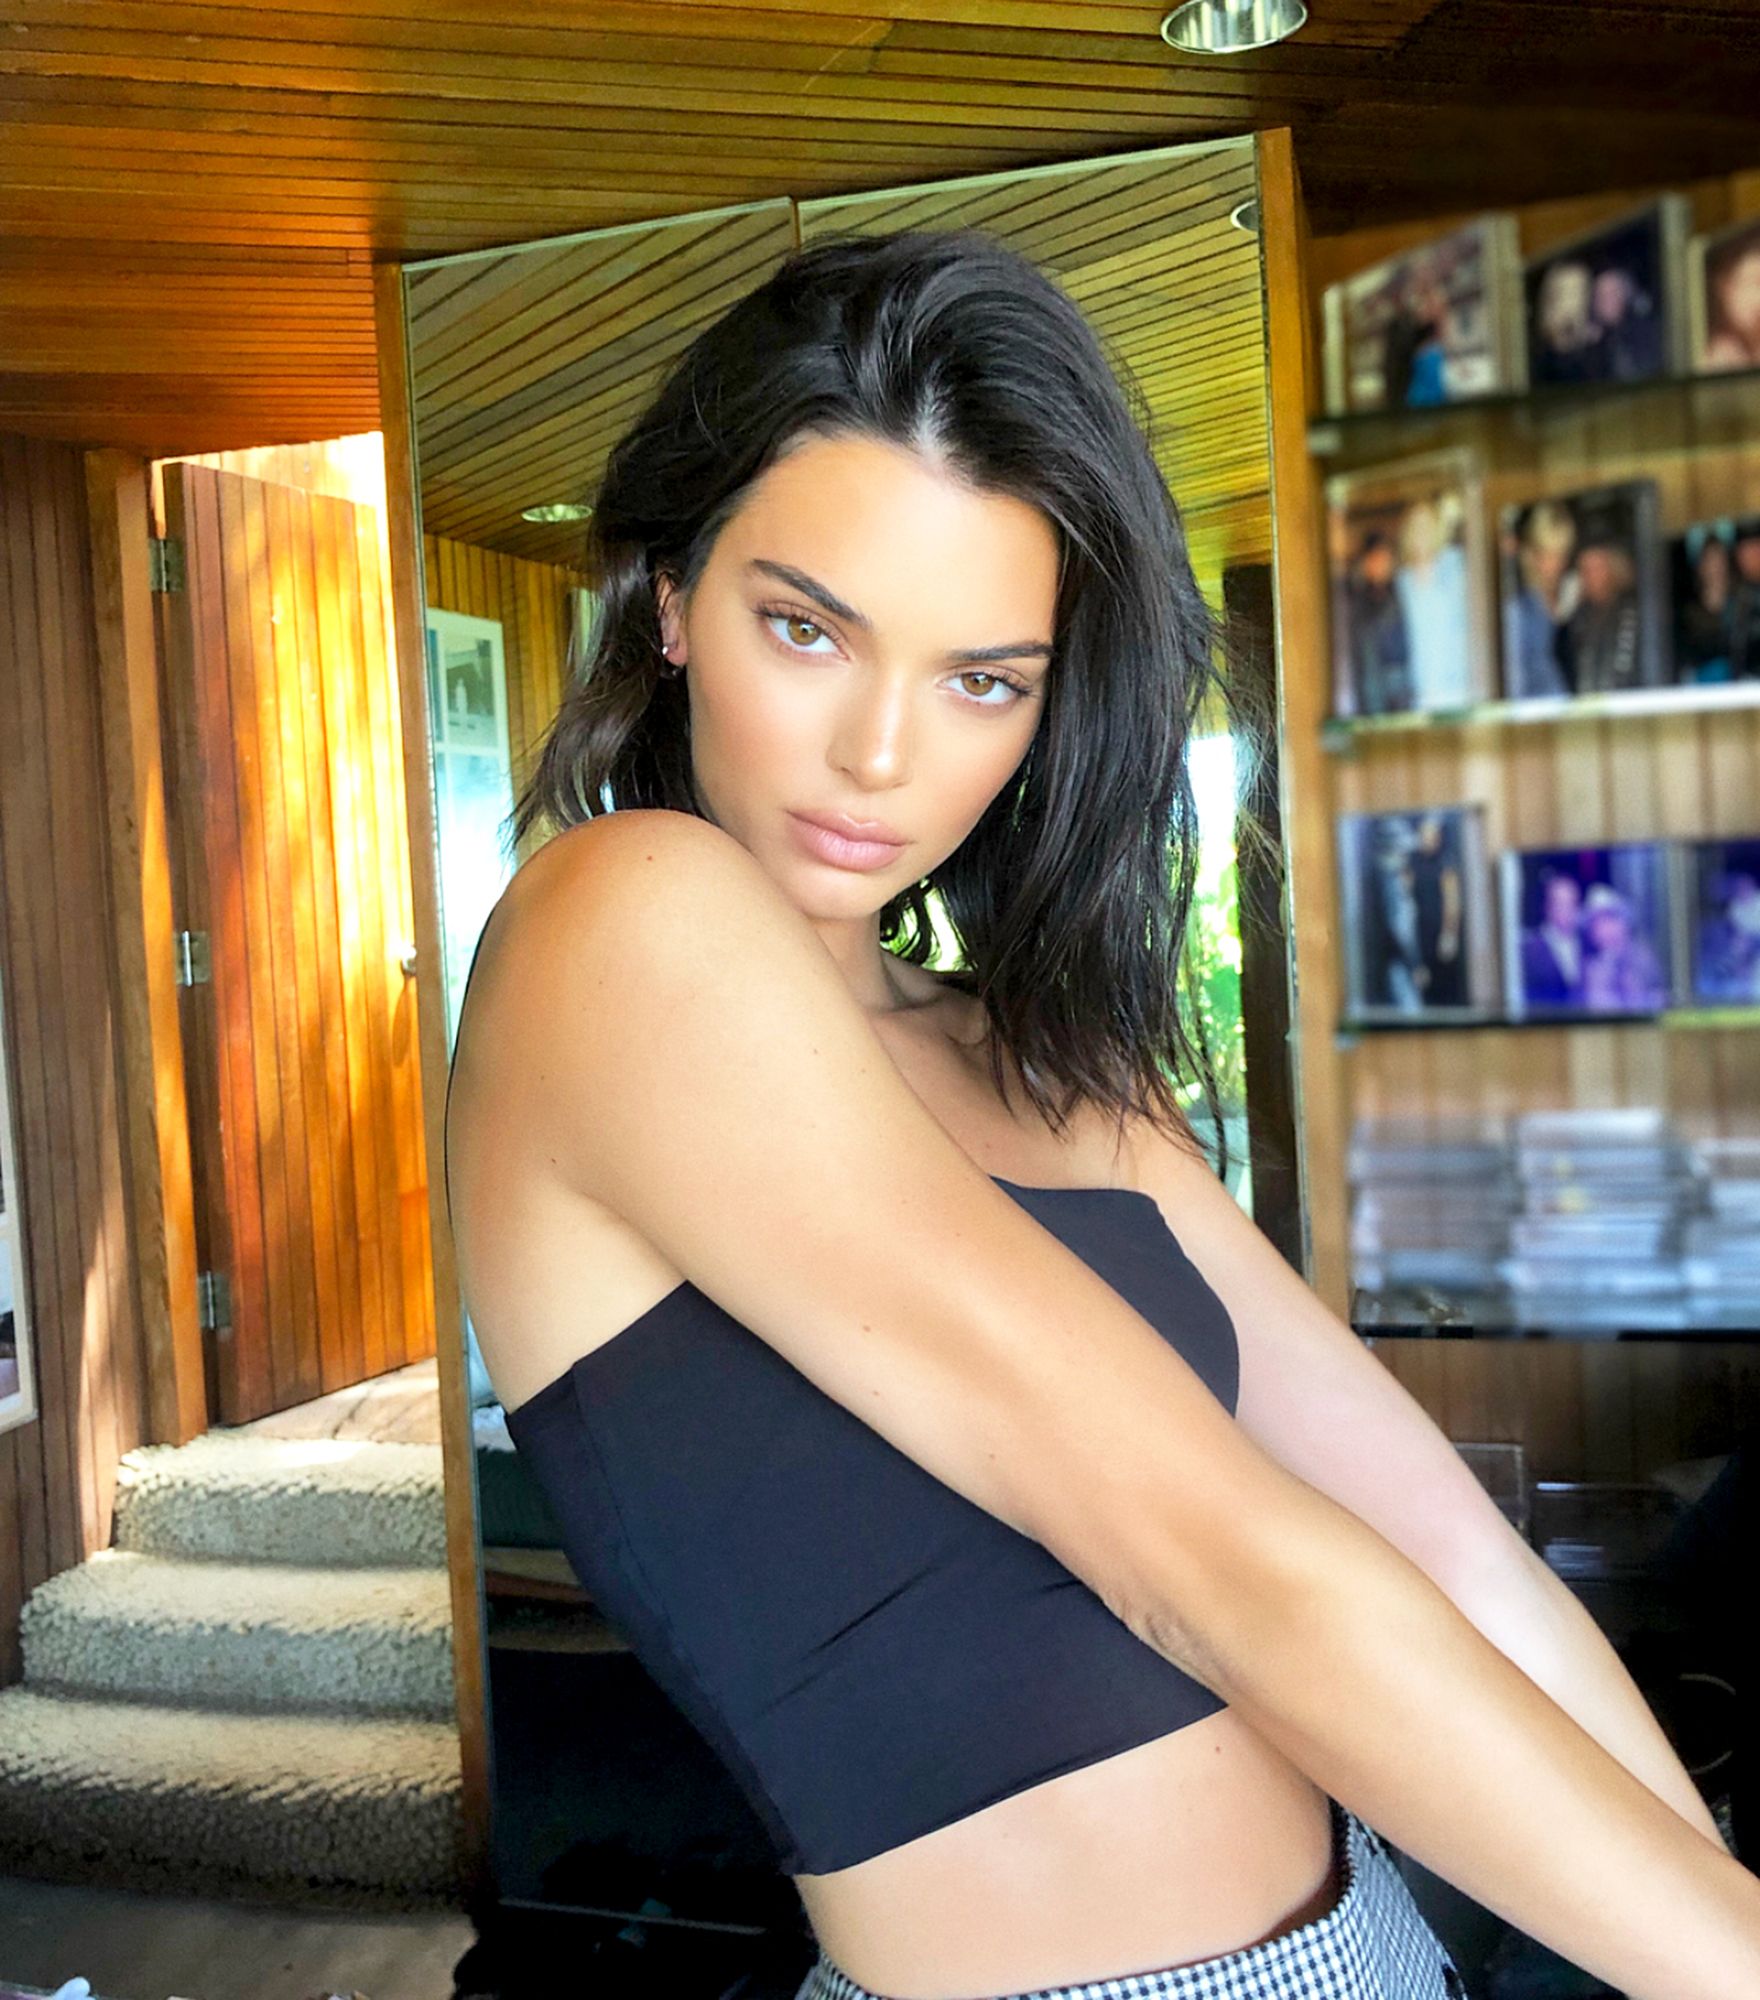 Kendall Jenner Goes Topless to Talk About Acne Struggles